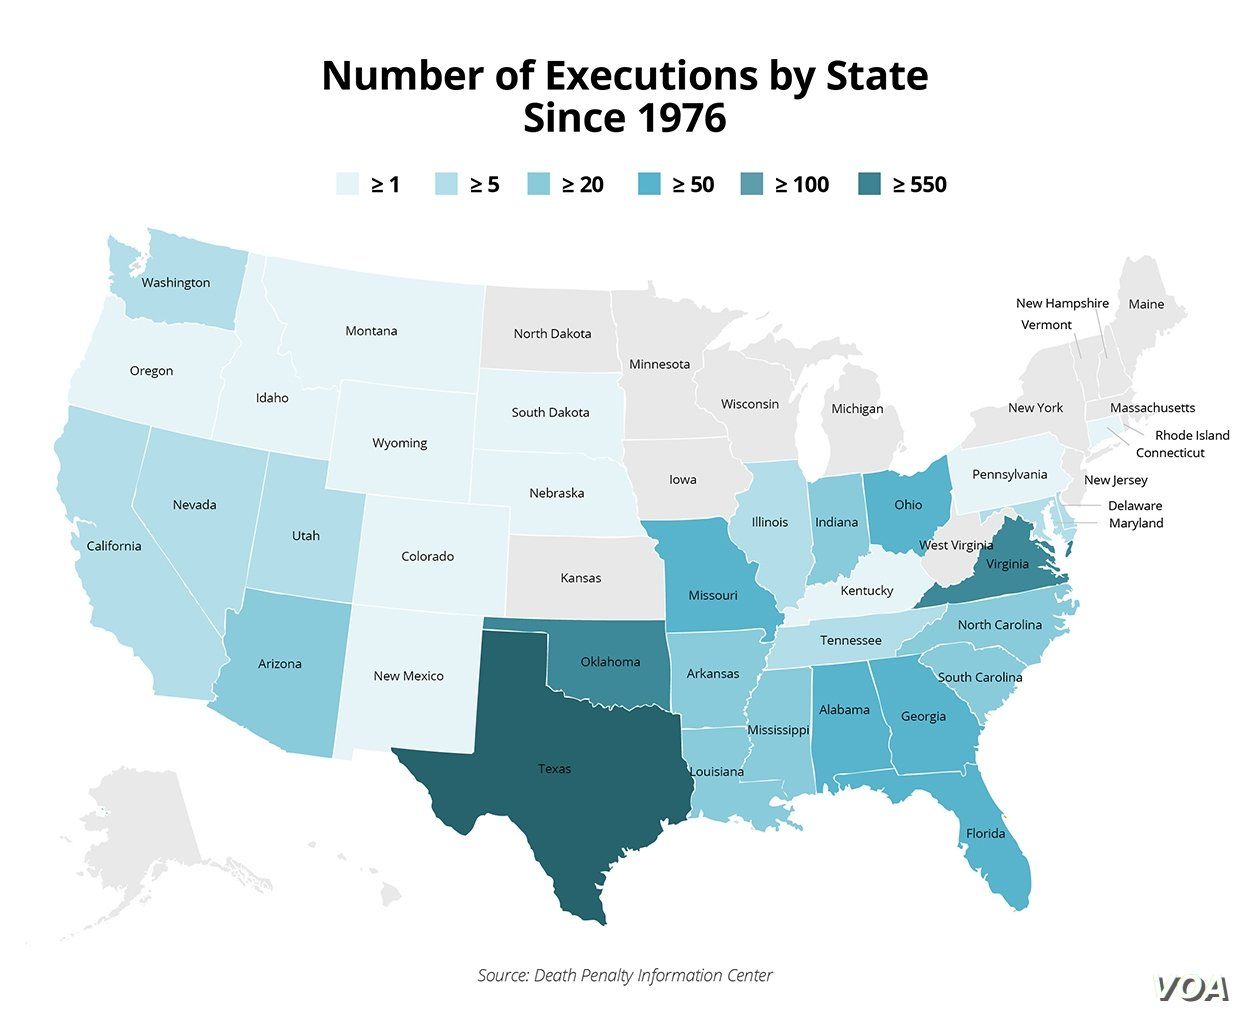 Number of Executions by State Since 1976